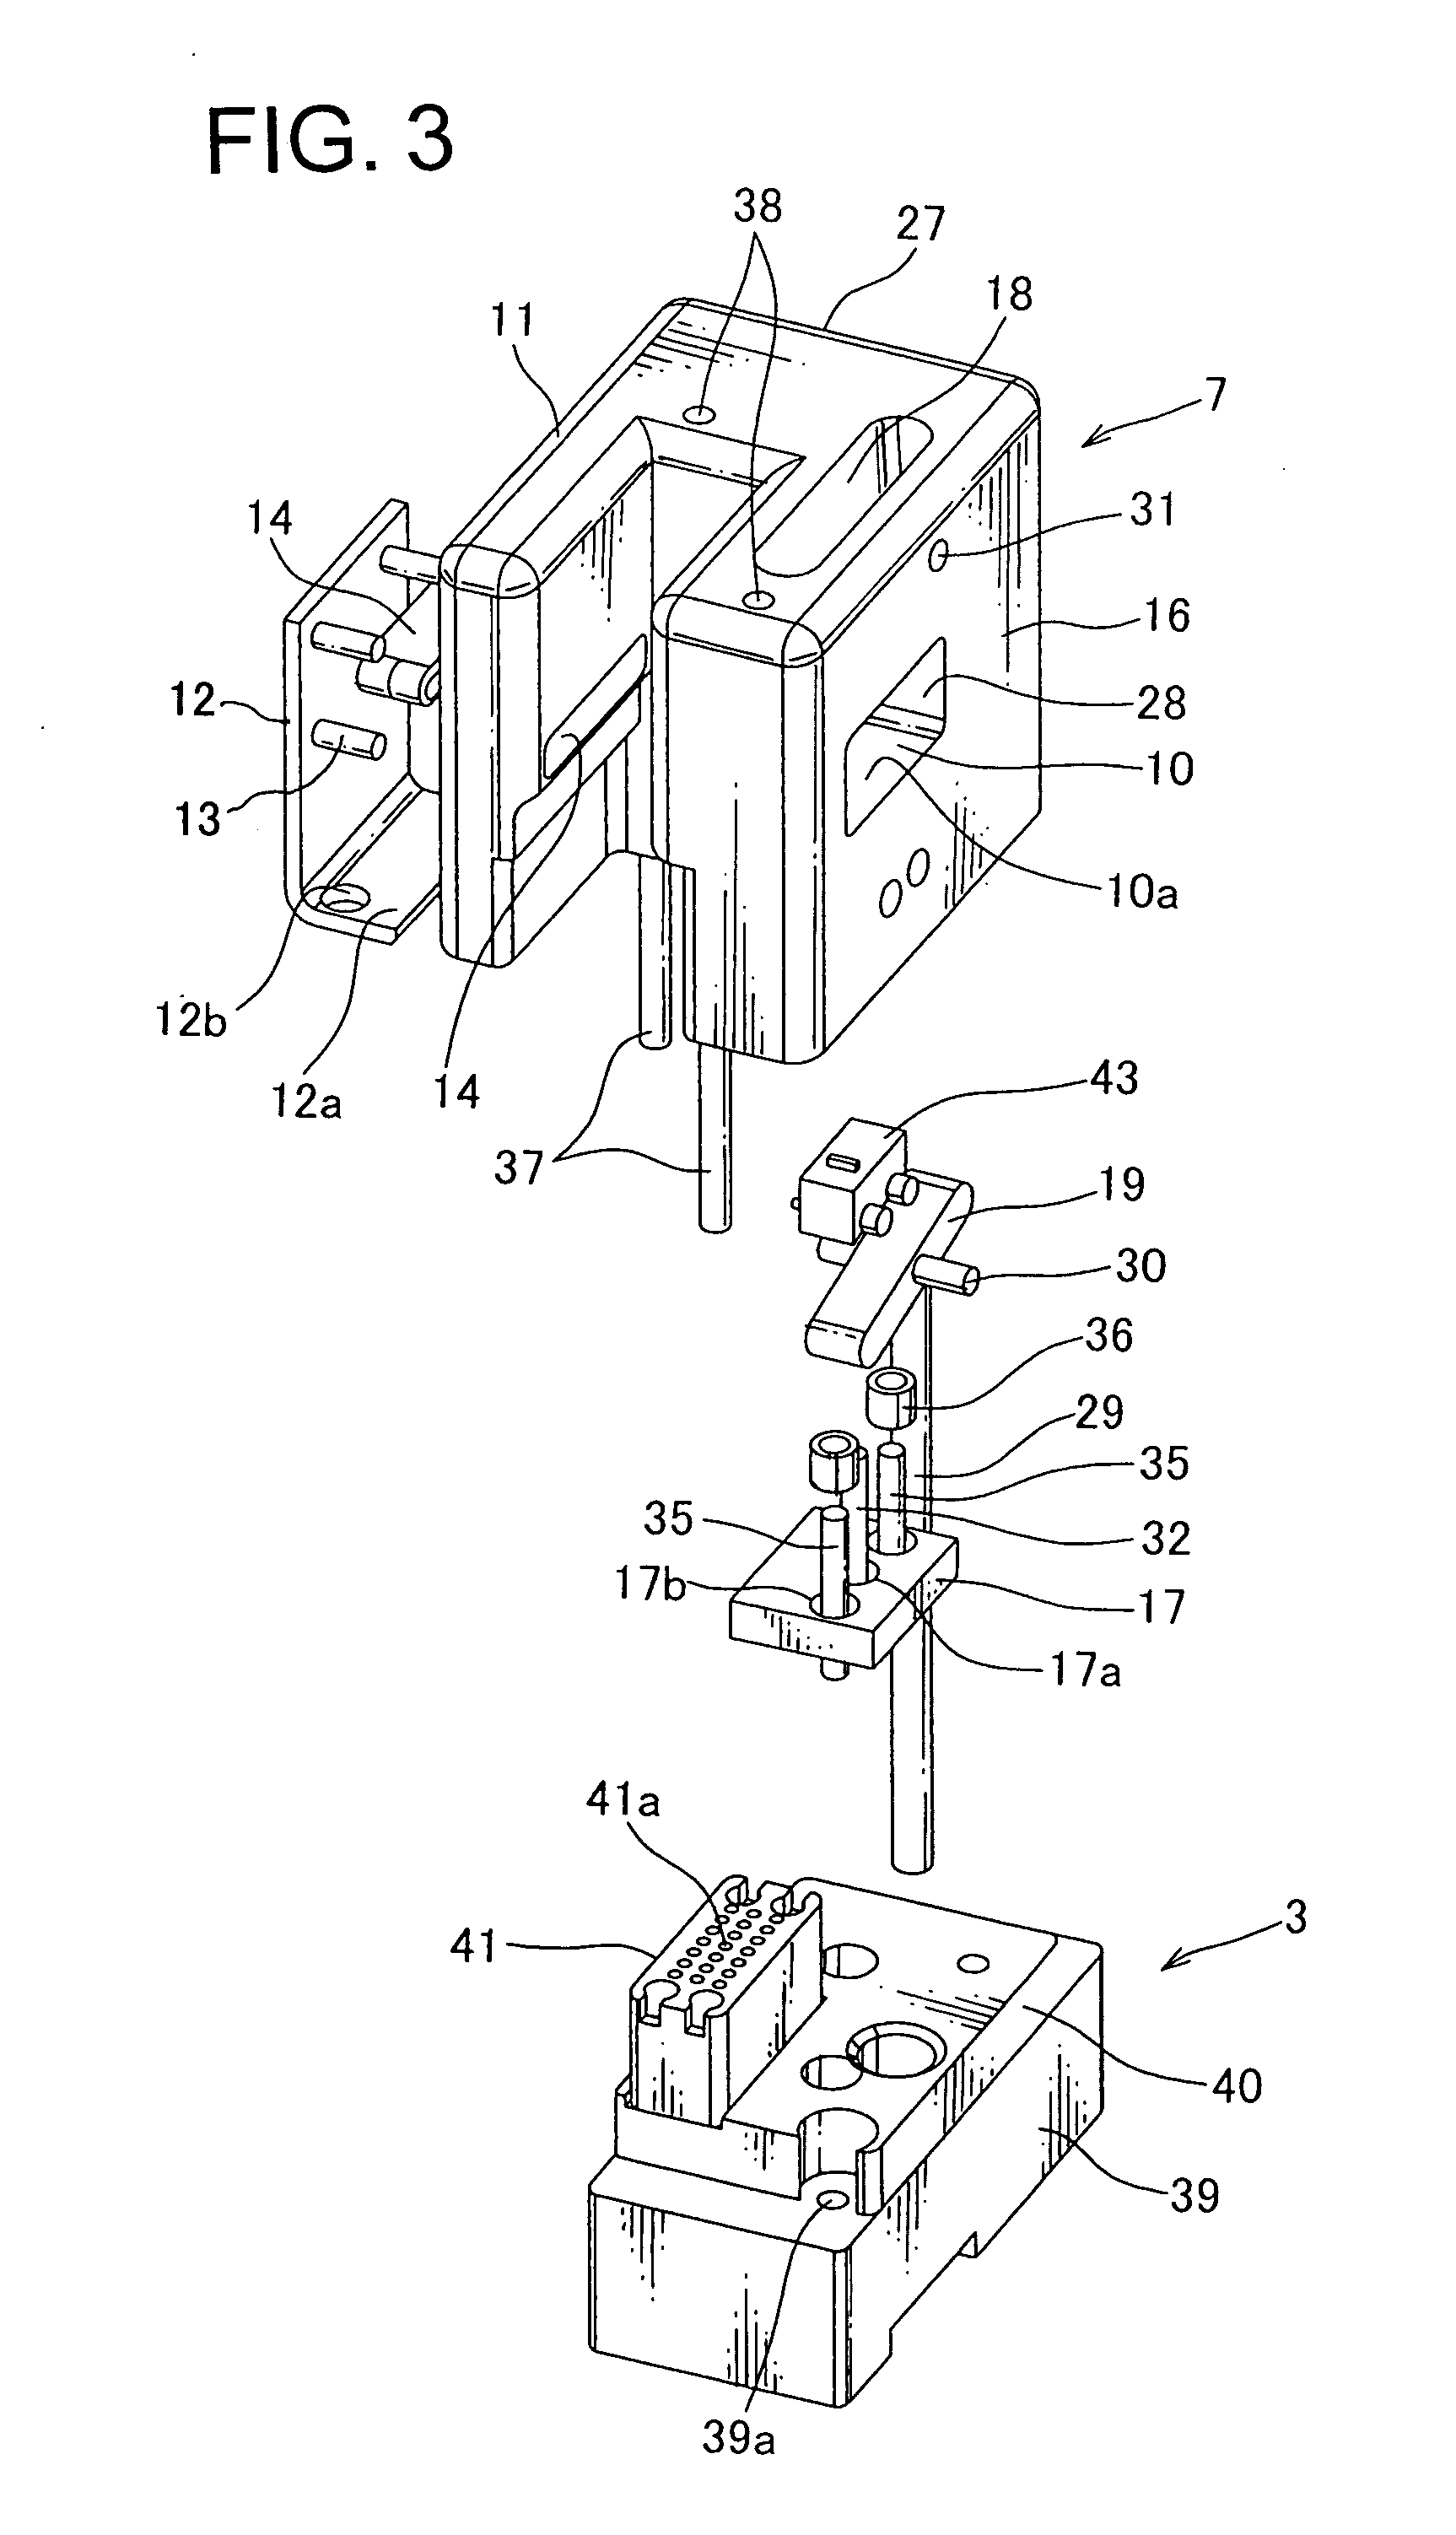 Continuity testing device